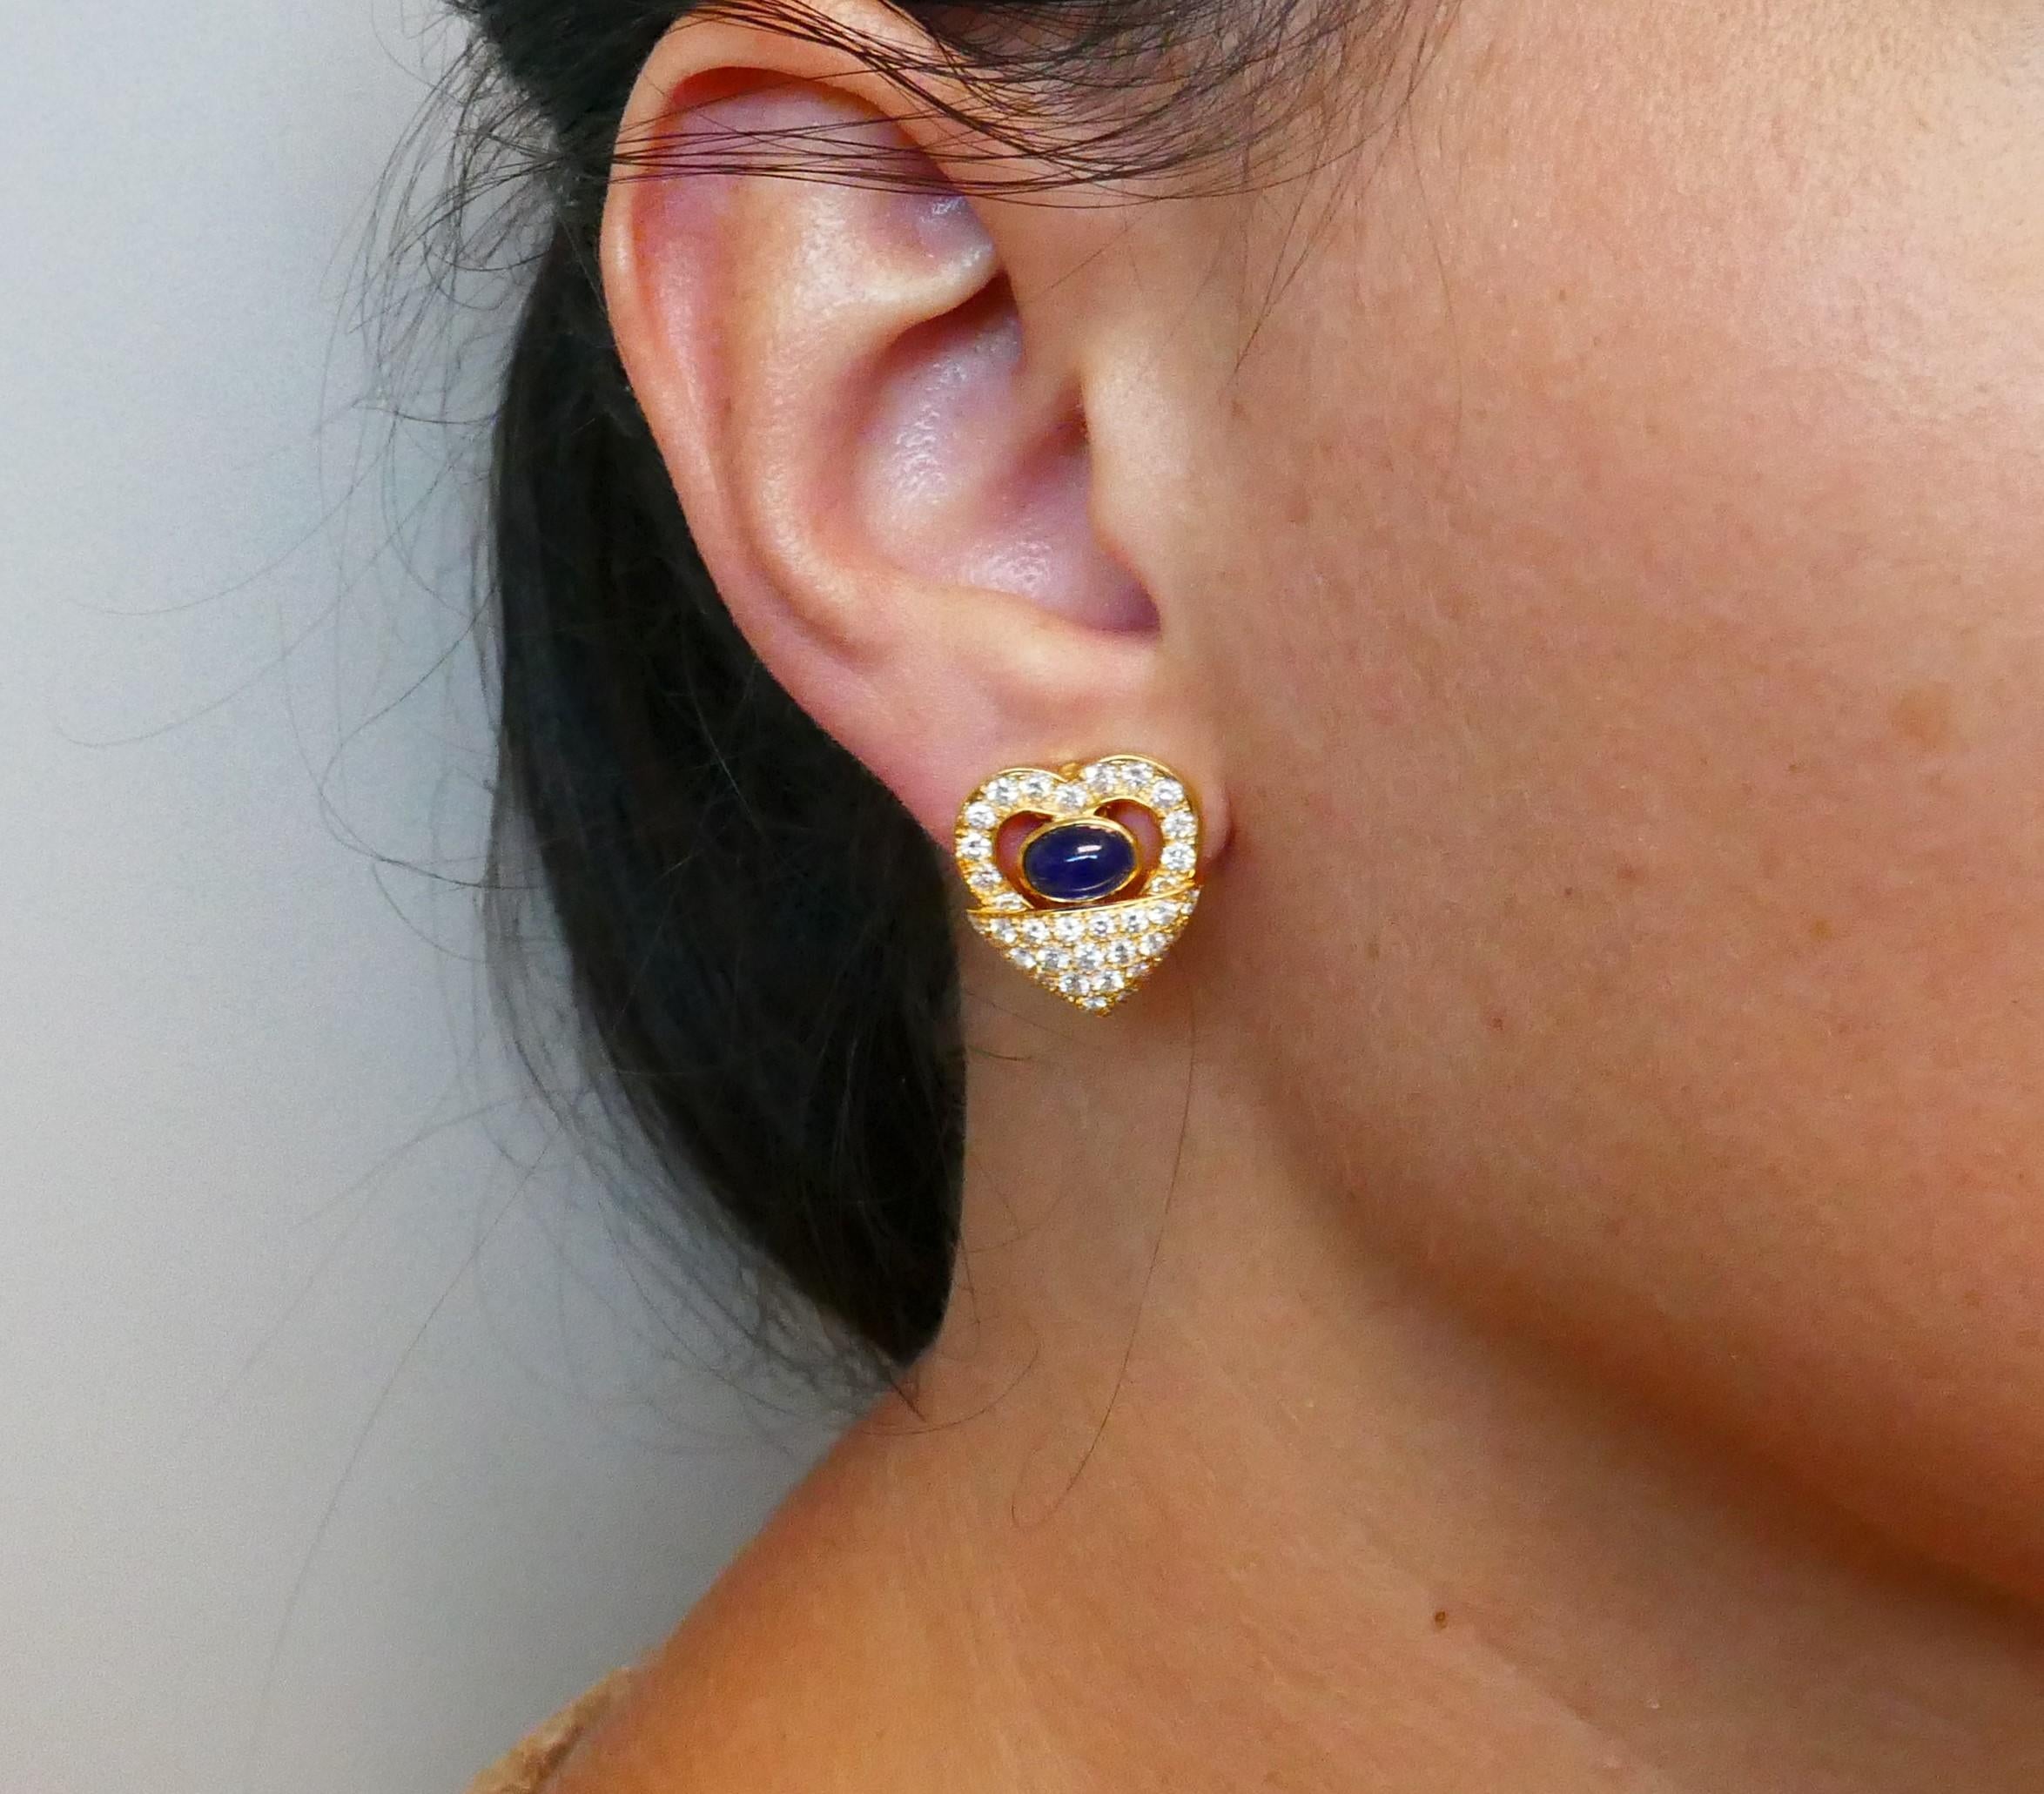 Elegant clip-on earrings made of 18 karat (stamped) yellow gold encrusted with round brilliant cut diamonds (F-G color, VS clarity, approximately 1.50 carats total weight) and featuring two cabochon sapphires (approximately 2 carats total